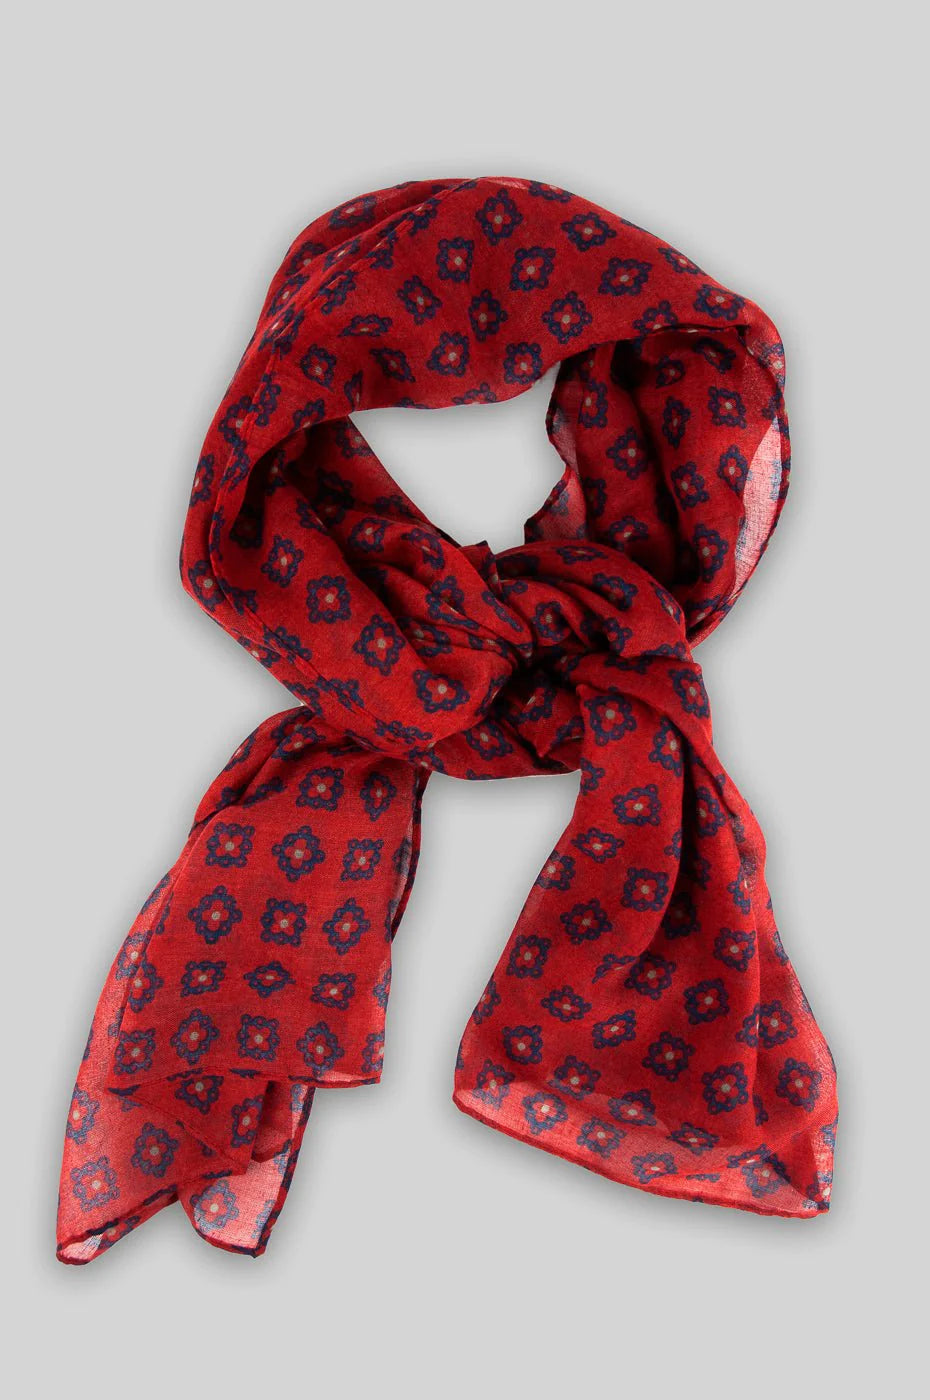 Shop Unisex Patterened Scarf in Red or browse our range of scarved for men and women in a variety of colours in-store at Aliverti Cape Town, or shop online. We deliver in South Africa & offer multiple payment plans as well as accept multiple safe & secure payment methods.